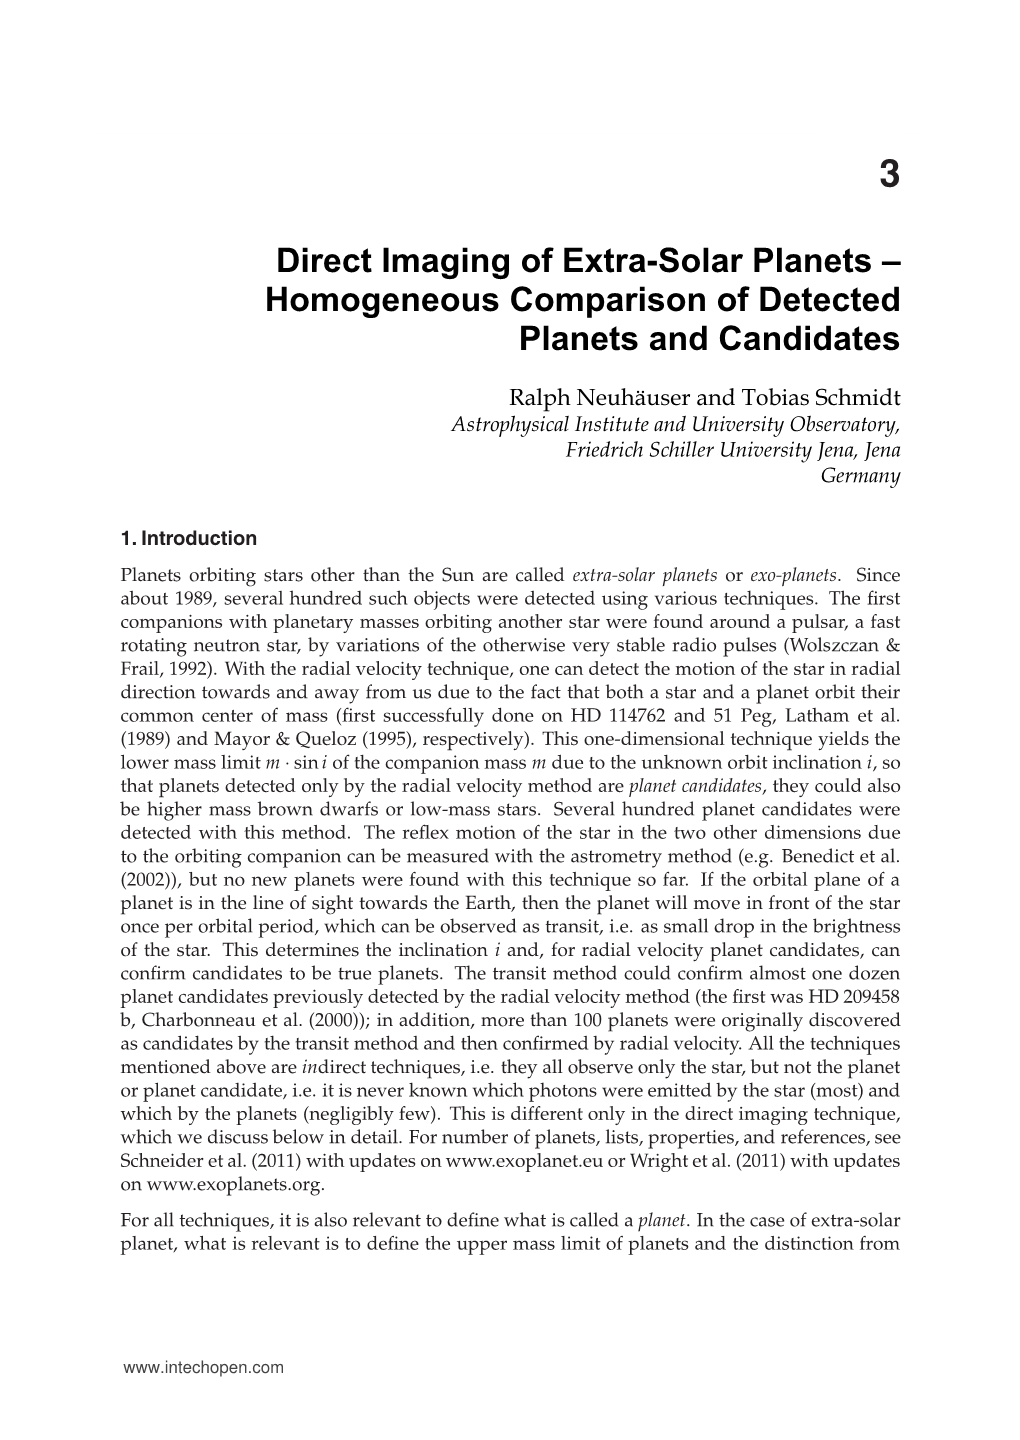 Direct Imaging of Extra-Solar Planets – Homogeneous Comparison of Detected Planets and Candidates